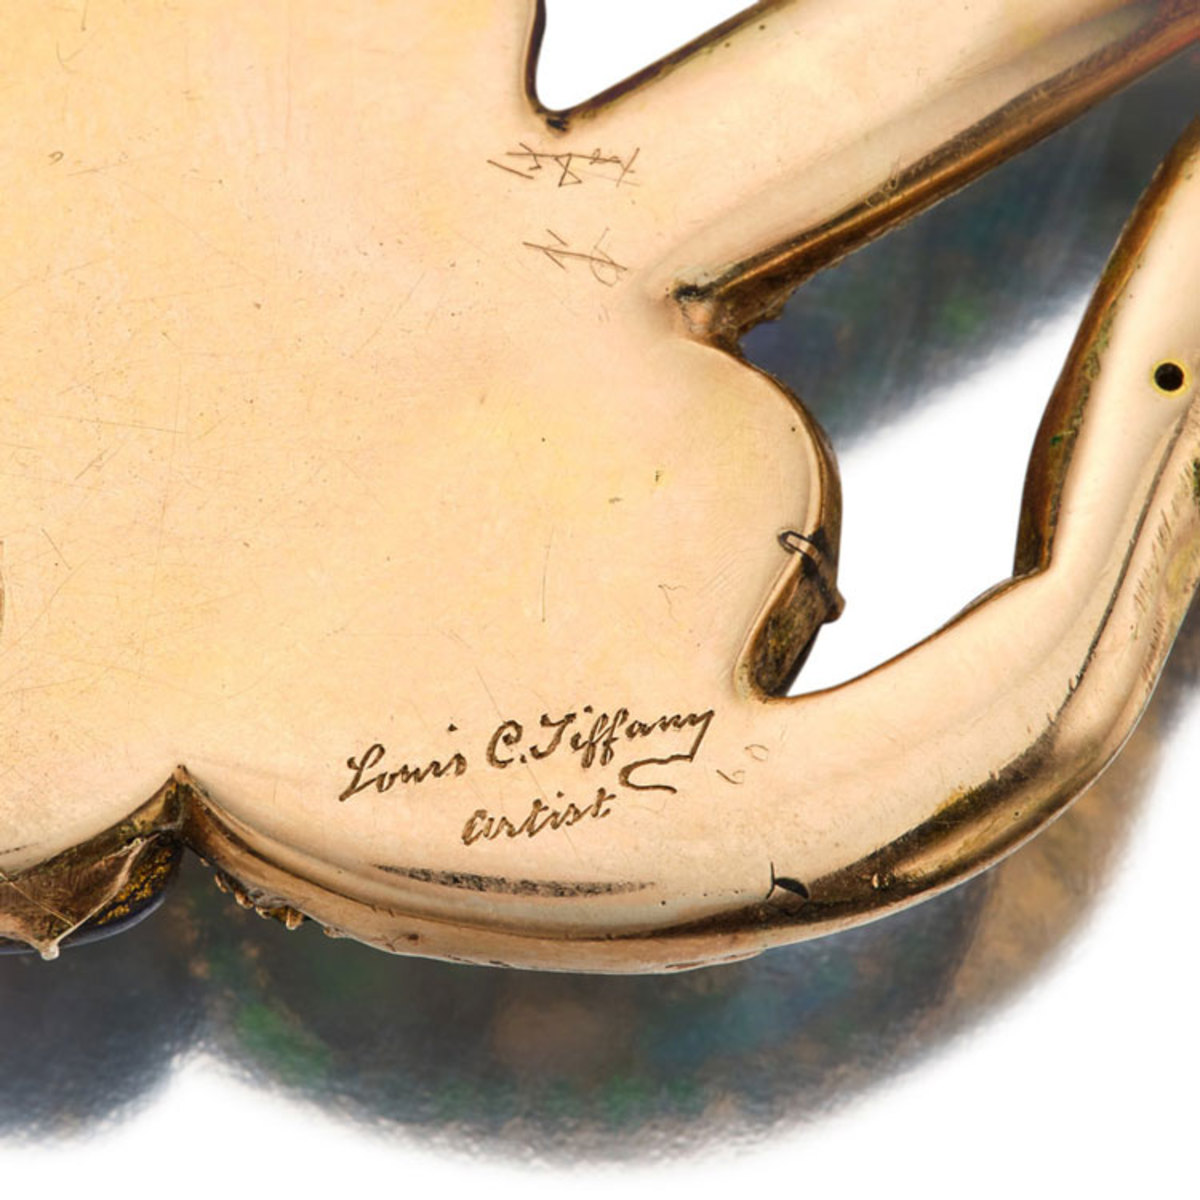 Louis Comfort Tiffany's signature on the back of the pendant.